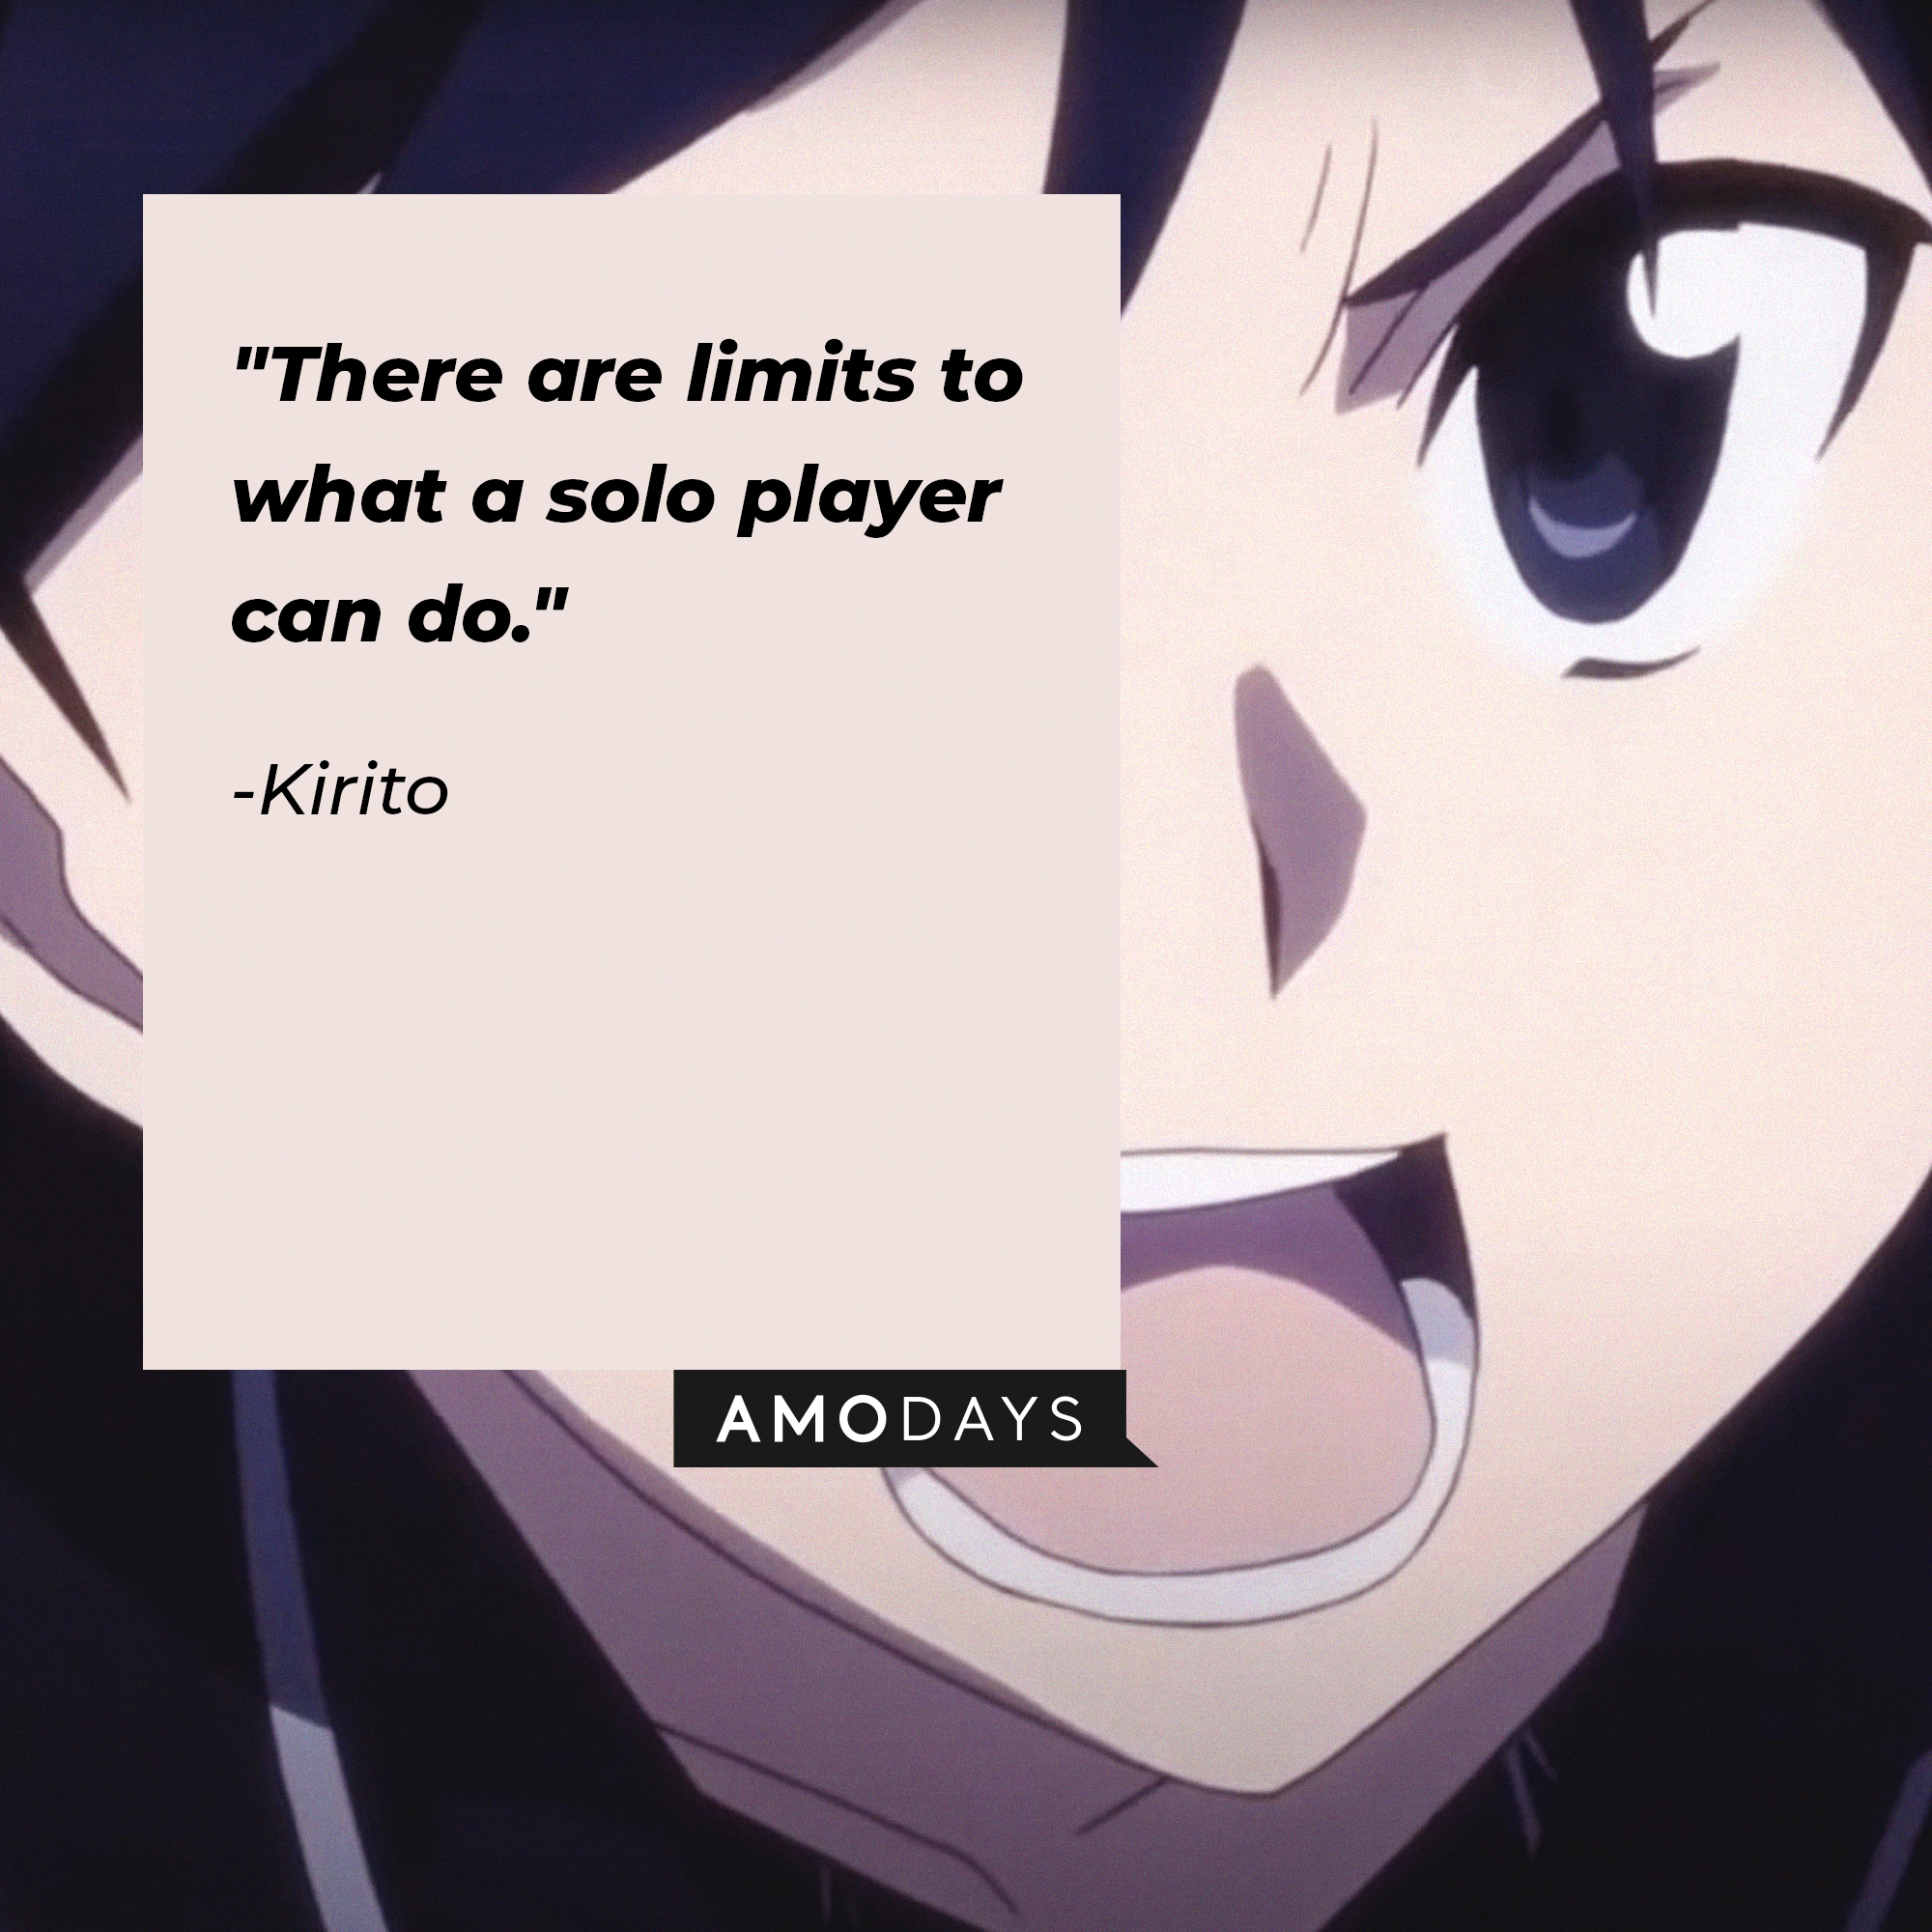 Kirito's quote: "There are limits to what a solo player can do." | Source: Facebook.com/SwordArtOnlineUSA